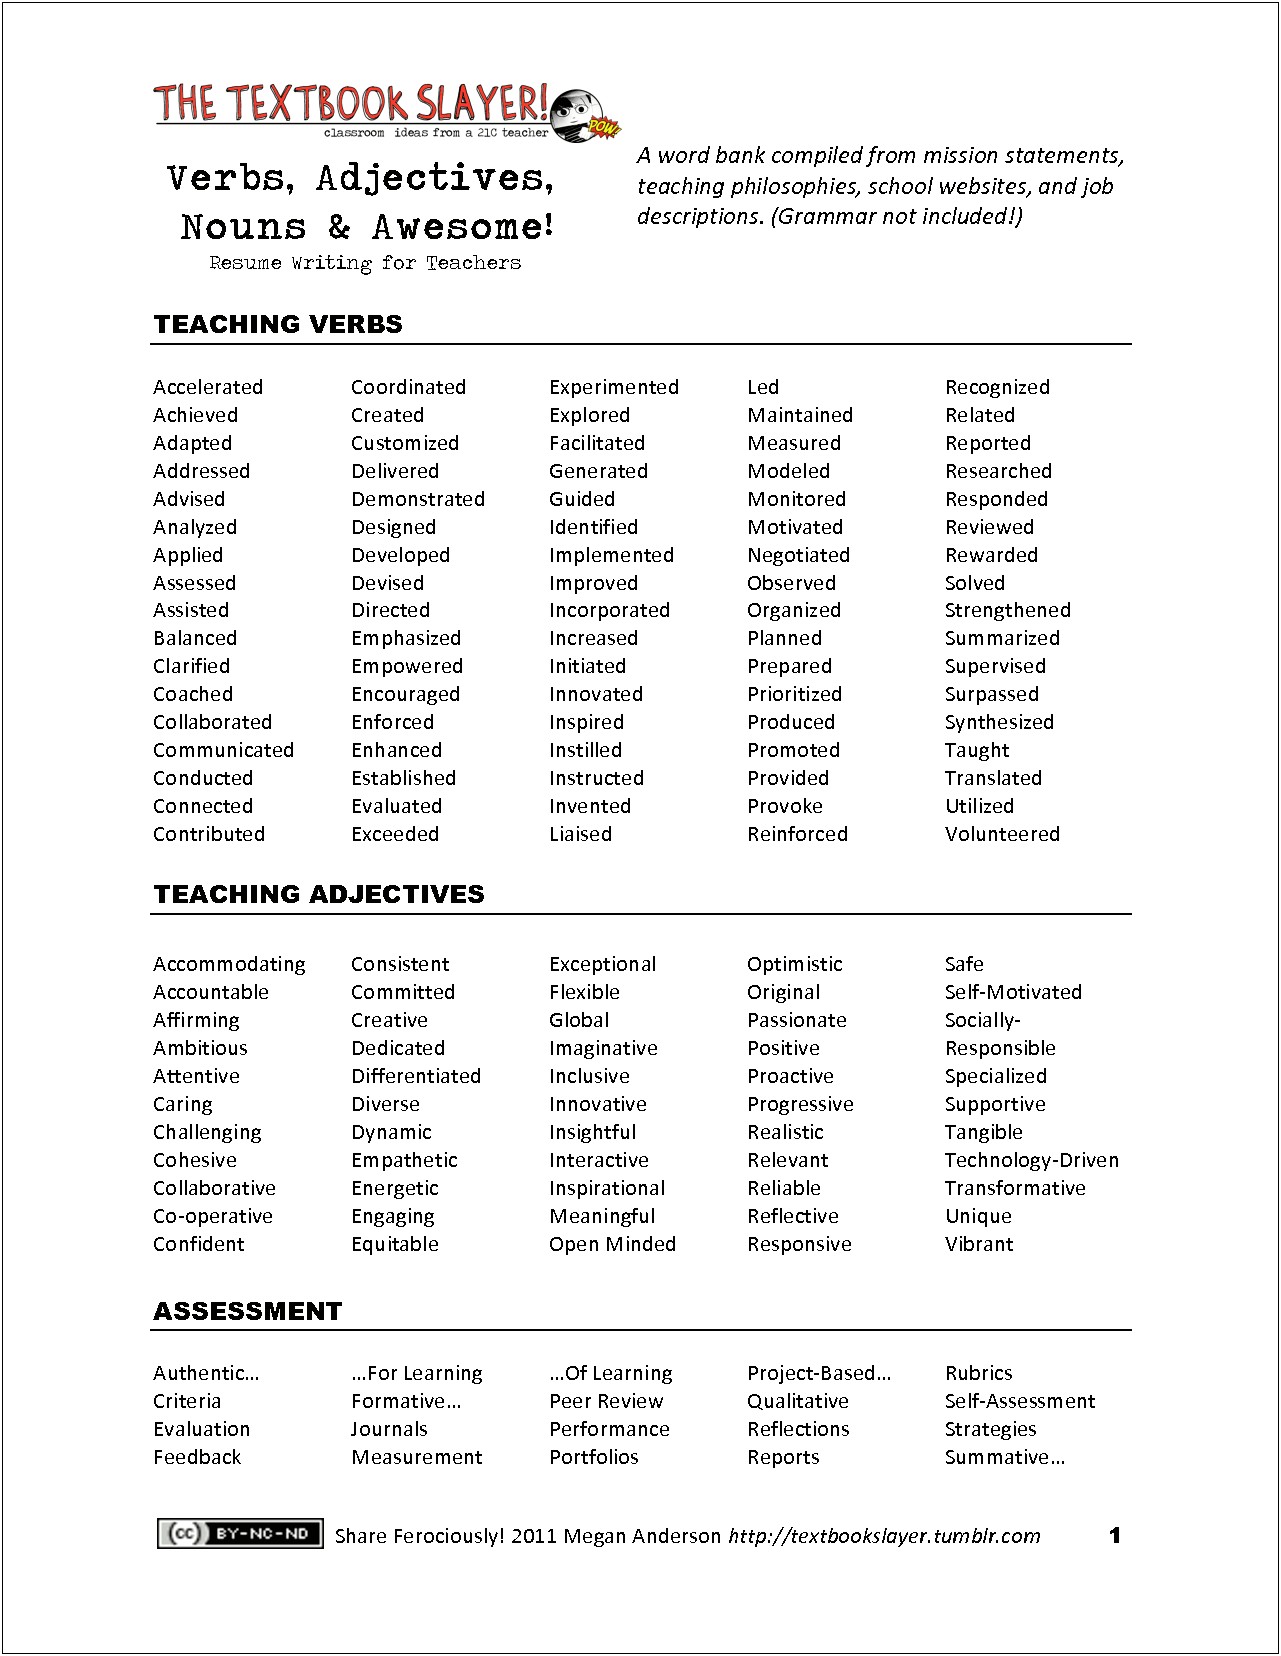 Descrptive Words To Use On Resume